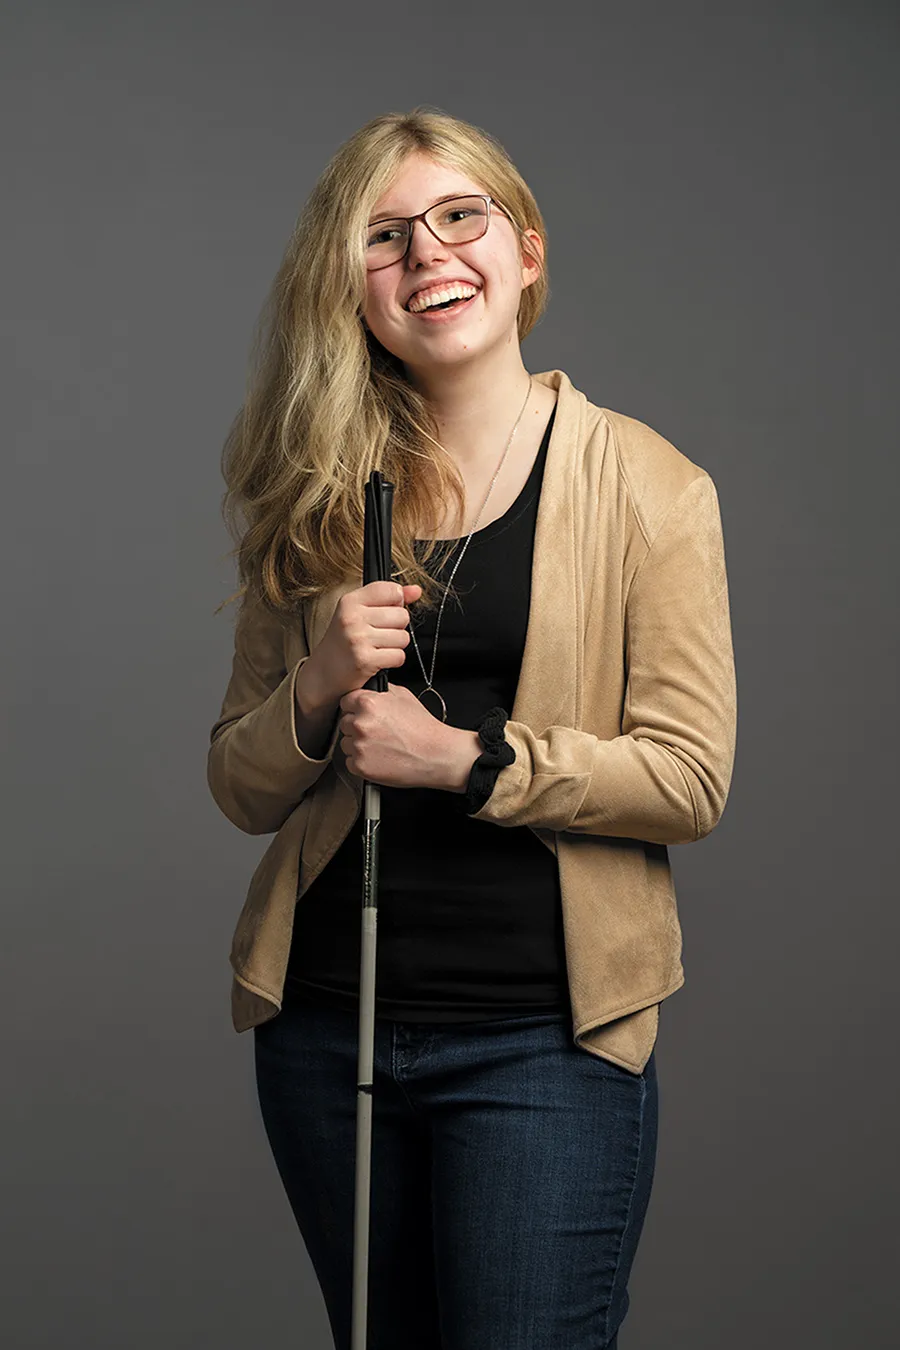 kaleigh brndle with long blond air smiling holding her white cane